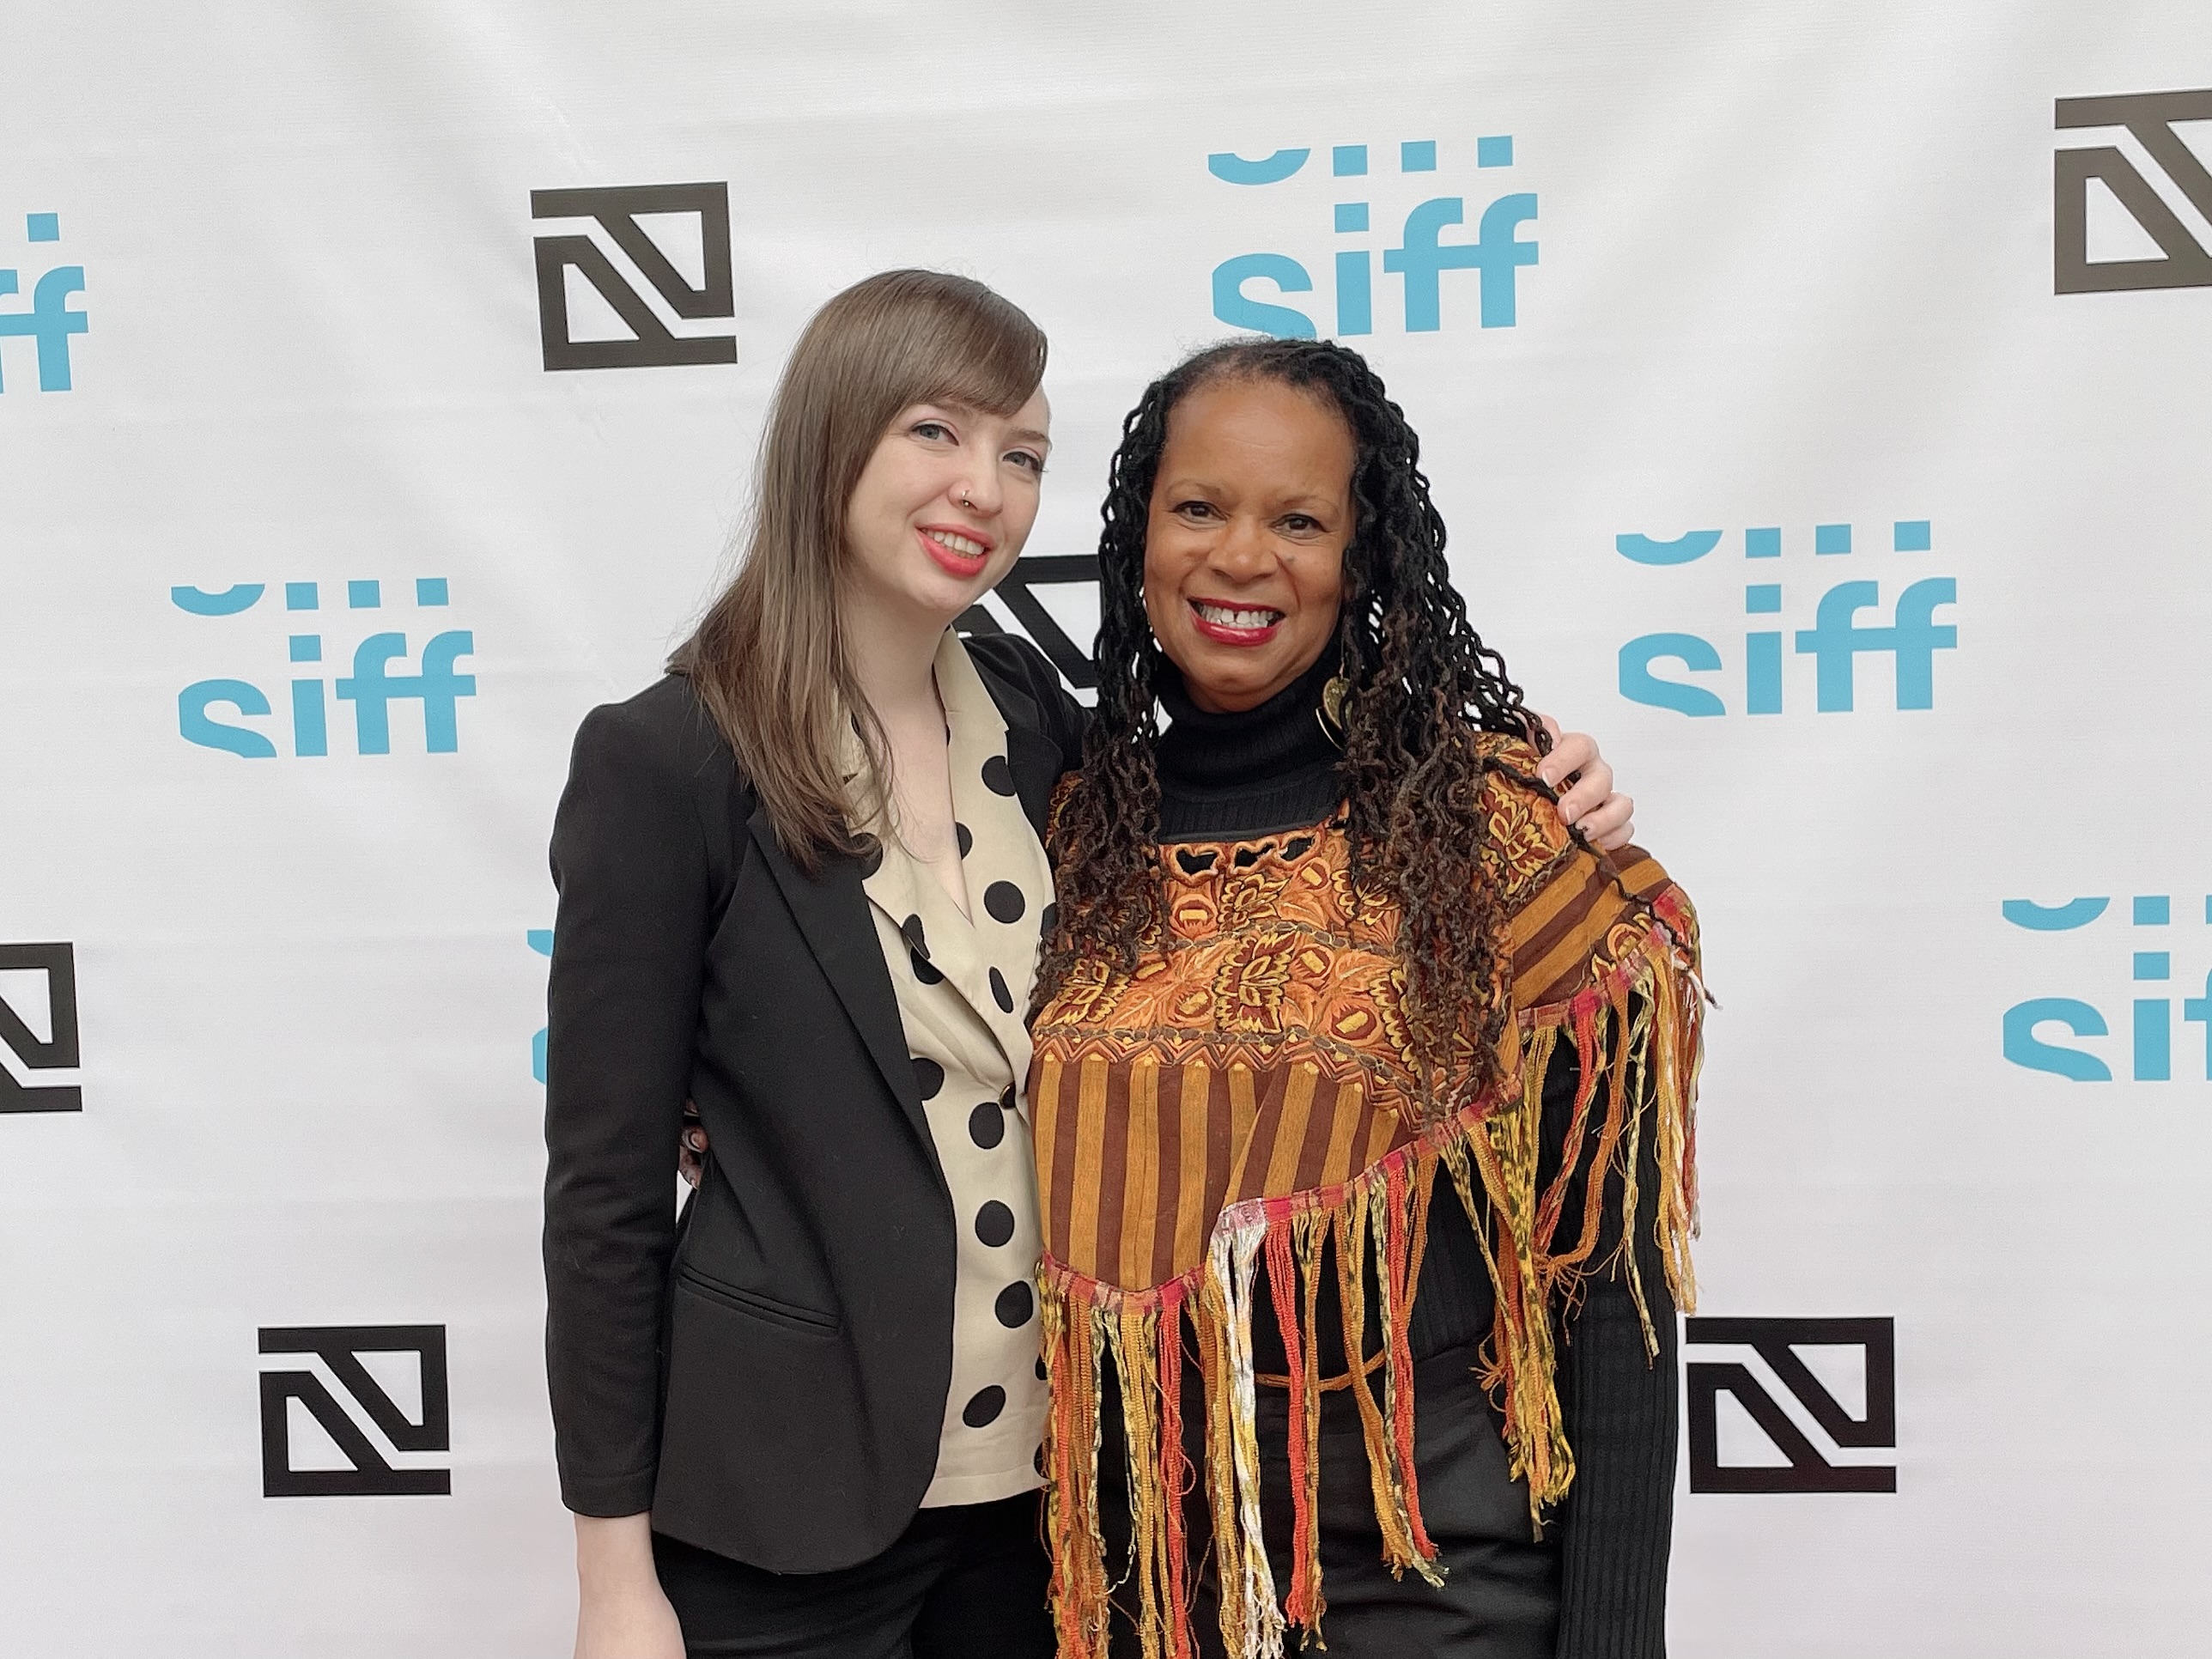 Daresha Kyi (right), a black woman with dreadlocks and a brown striped shawl, and Laura Tatham (left), a white woman with a black blazer and polka-dot shirt, pose together at Seattle International Film Festival. Photo courtesy of Daresha Kyi. 